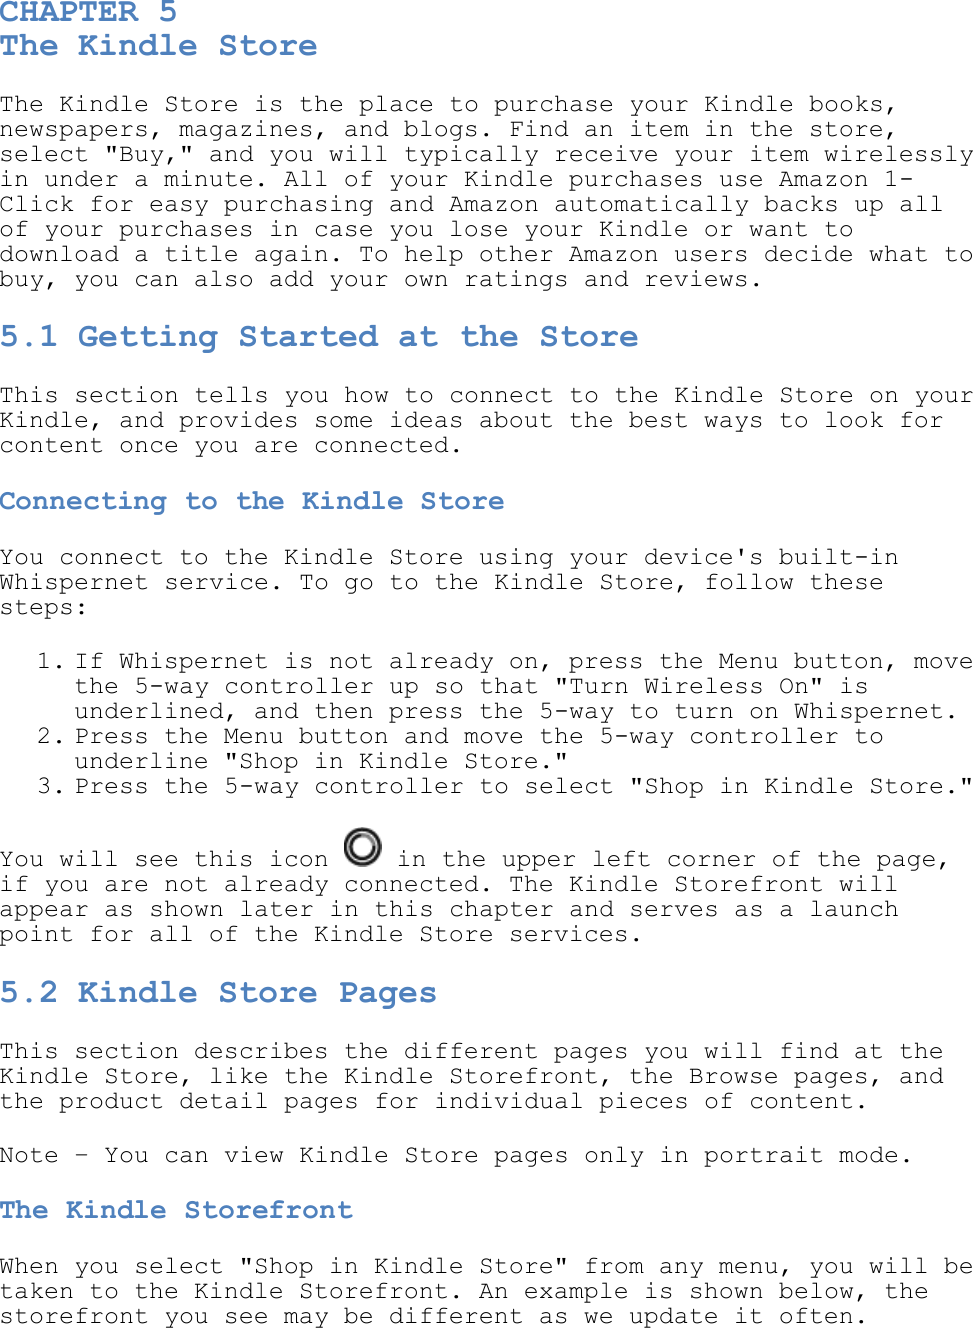   CHAPTER 5 The Kindle Store The Kindle Store is the place to purchase your Kindle books, newspapers, magazines, and blogs. Find an item in the store, select &quot;Buy,&quot; and you will typically receive your item wirelessly in under a minute. All of your Kindle purchases use Amazon 1-Click for easy purchasing and Amazon automatically backs up all of your purchases in case you lose your Kindle or want to download a title again. To help other Amazon users decide what to buy, you can also add your own ratings and reviews. 5.1 Getting Started at the Store This section tells you how to connect to the Kindle Store on your Kindle, and provides some ideas about the best ways to look for content once you are connected. Connecting to the Kindle Store You connect to the Kindle Store using your device&apos;s built-in Whispernet service. To go to the Kindle Store, follow these steps: 1. If Whispernet is not already on, press the Menu button, move the 5-way controller up so that &quot;Turn Wireless On&quot; is underlined, and then press the 5-way to turn on Whispernet.  2. Press the Menu button and move the 5-way controller to underline &quot;Shop in Kindle Store.&quot;  3. Press the 5-way controller to select &quot;Shop in Kindle Store.&quot;  You will see this icon   in the upper left corner of the page, if you are not already connected. The Kindle Storefront will appear as shown later in this chapter and serves as a launch point for all of the Kindle Store services. 5.2 Kindle Store Pages This section describes the different pages you will find at the Kindle Store, like the Kindle Storefront, the Browse pages, and the product detail pages for individual pieces of content. Note – You can view Kindle Store pages only in portrait mode. The Kindle Storefront When you select &quot;Shop in Kindle Store&quot; from any menu, you will be taken to the Kindle Storefront. An example is shown below, the storefront you see may be different as we update it often.  